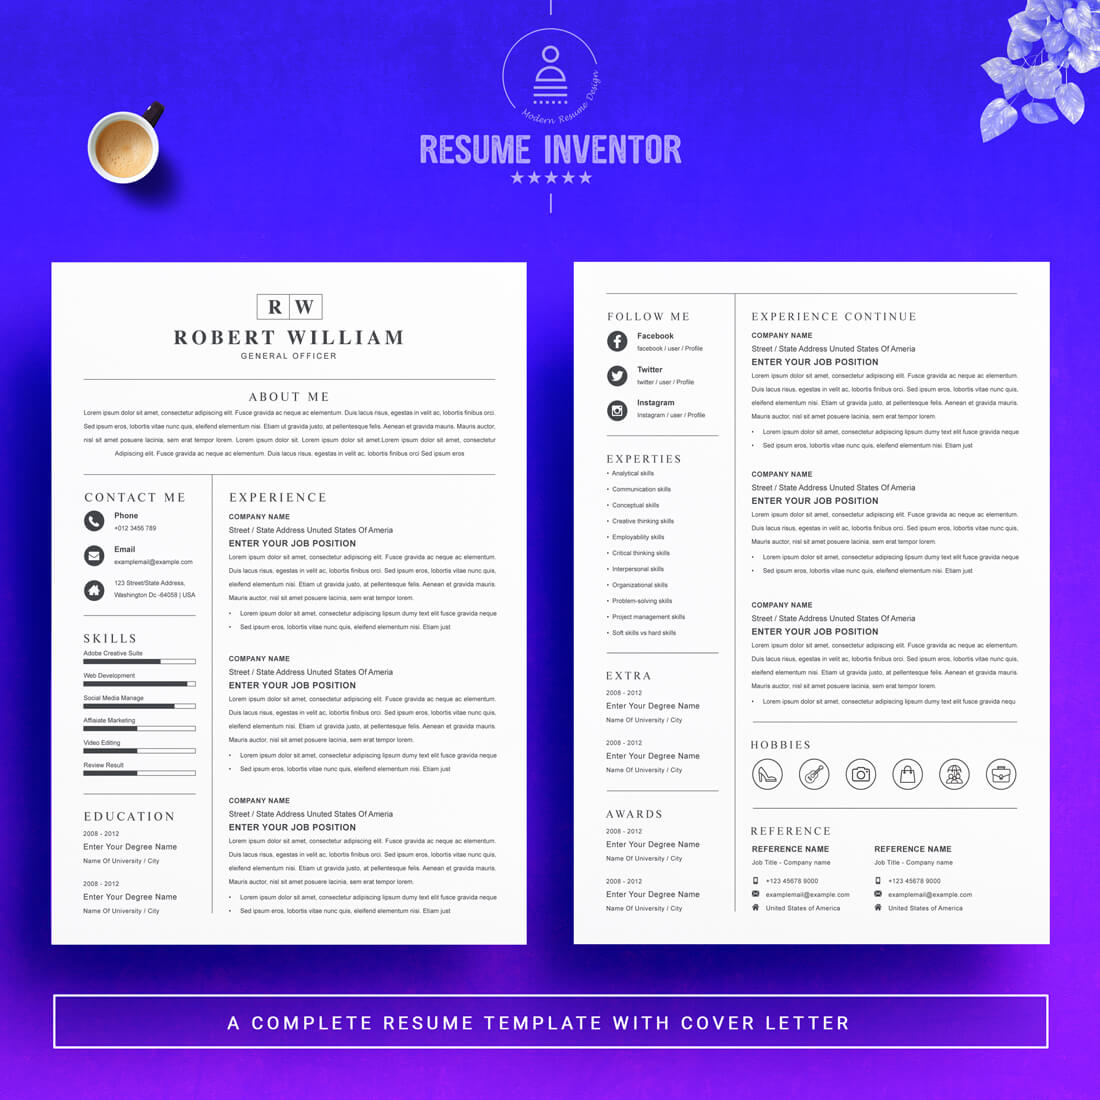 General Officer Clean & Professional Resume Template | Modern CV Template Design preview image.